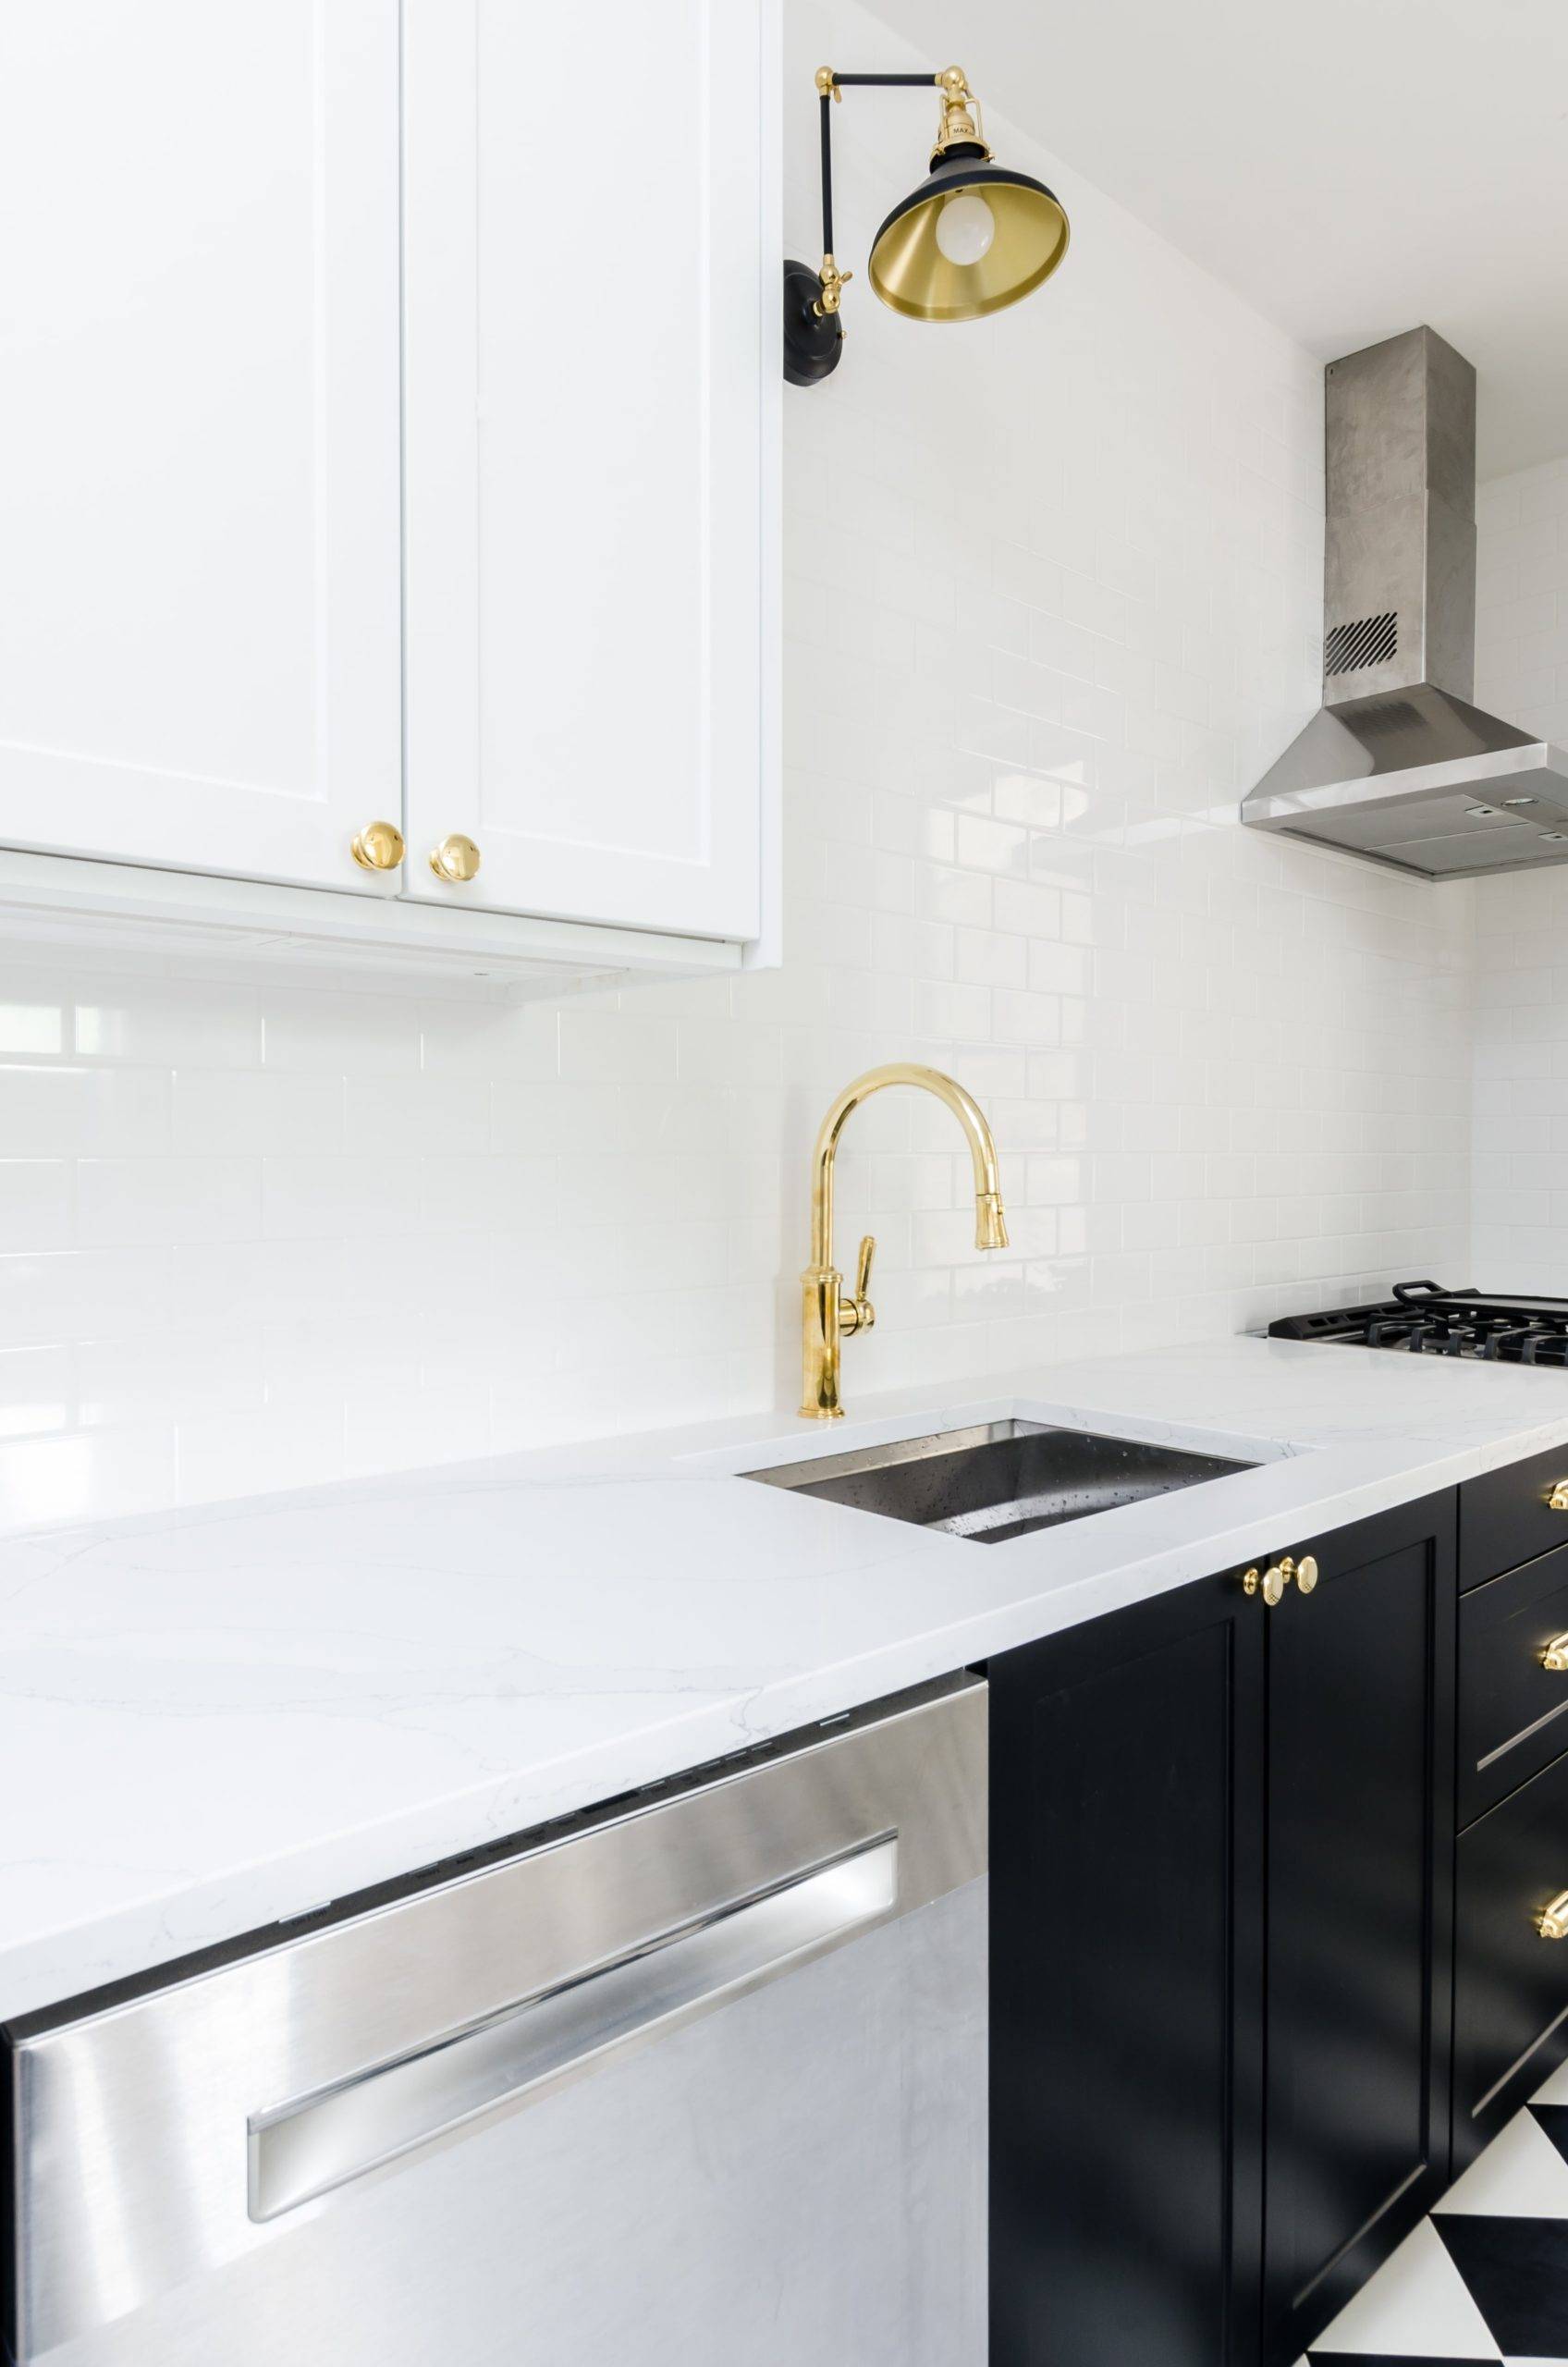 White countertops create wonderful contrast (from Unsplash)